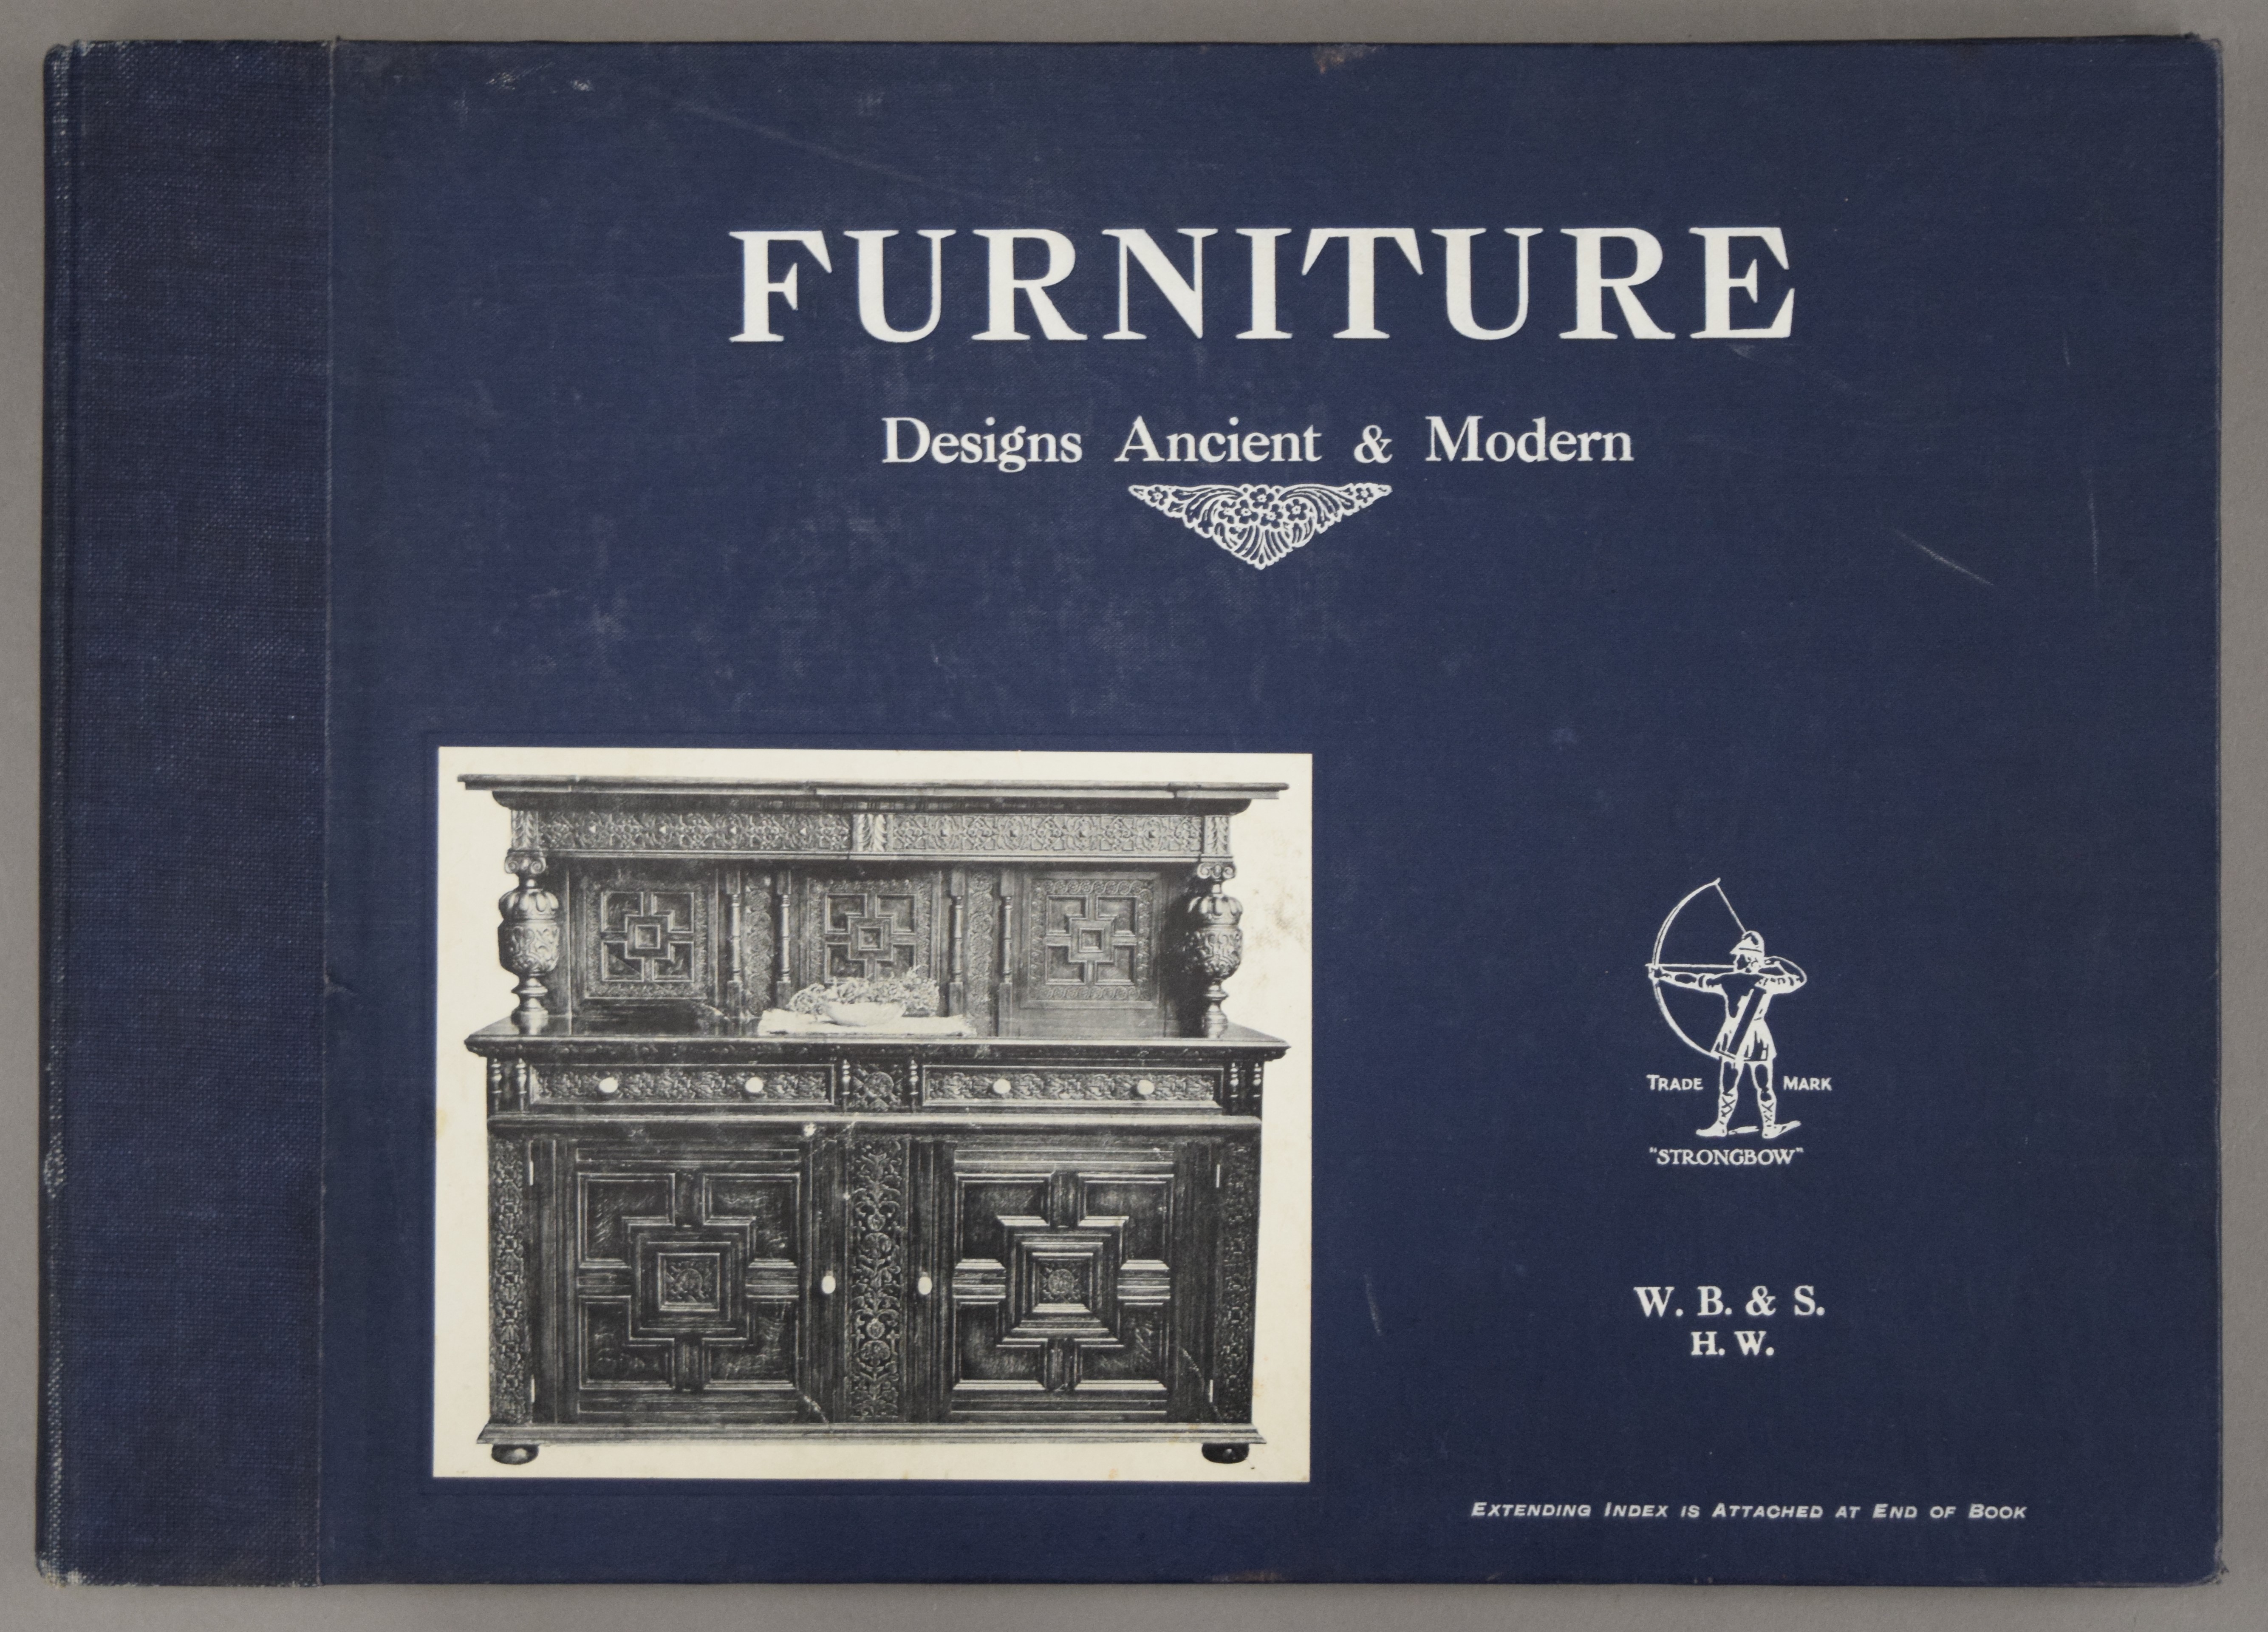 A Furniture Designs Ancient and Modern catalogue. - Image 2 of 10